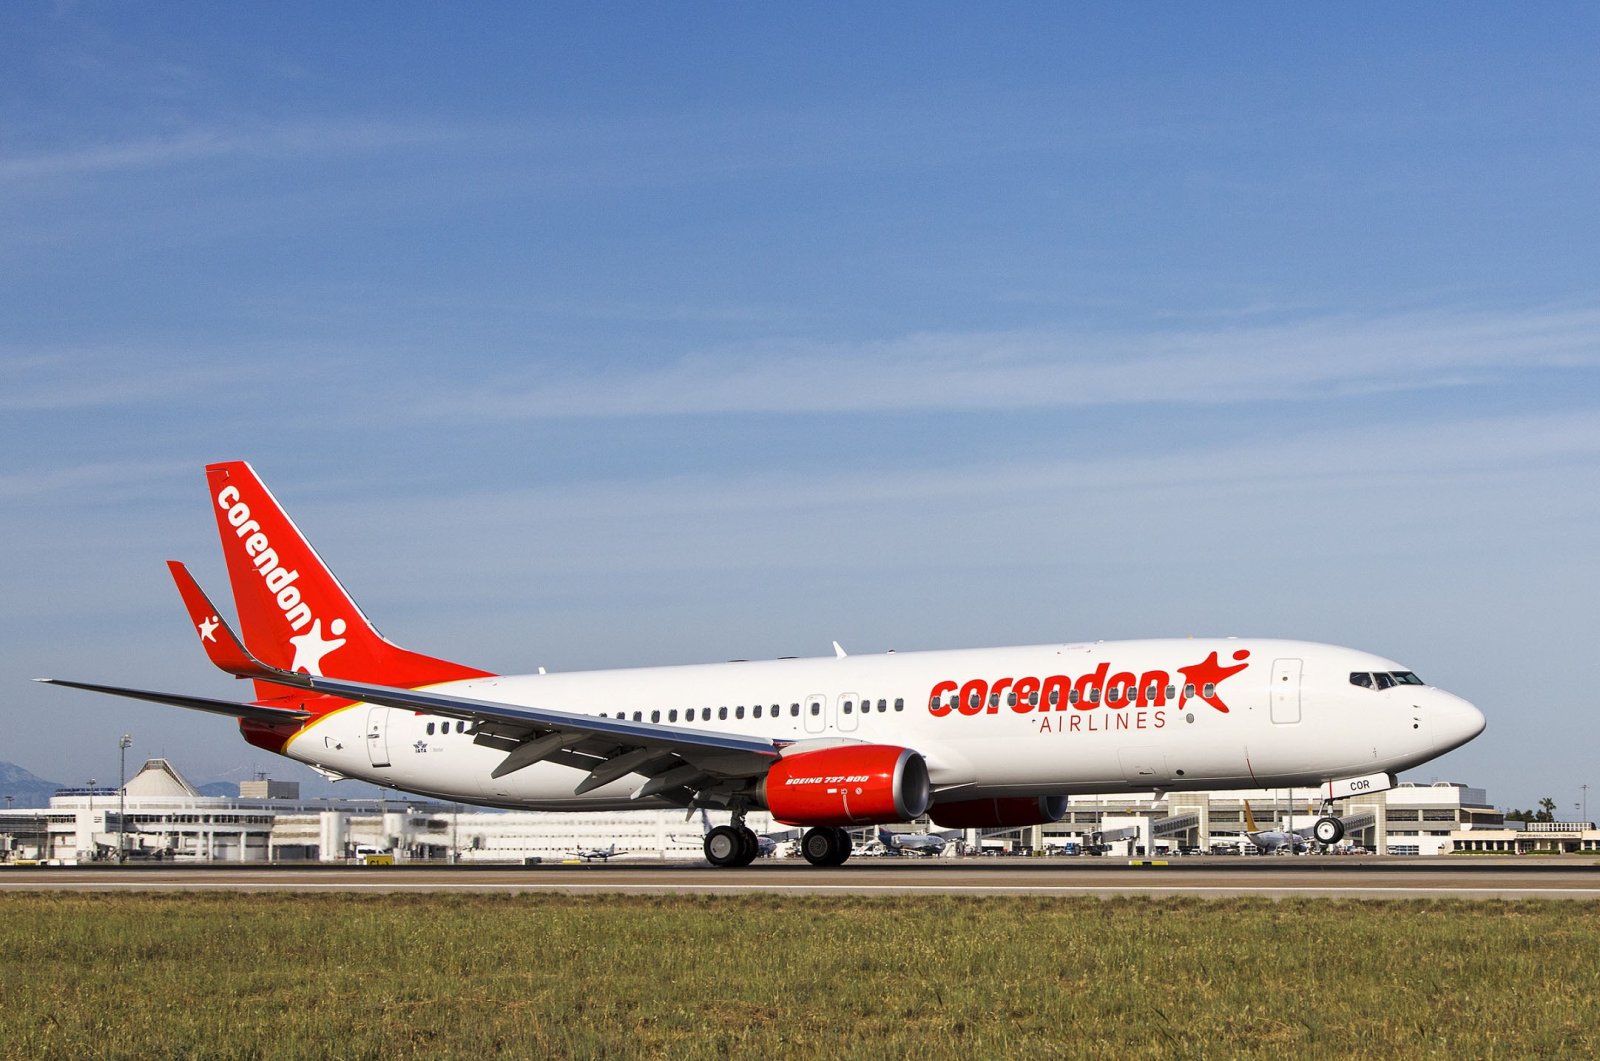 A Corendon Airlines plane is seen on the runway, March 16, 2022. (Courtesy of Corendon Airlines)